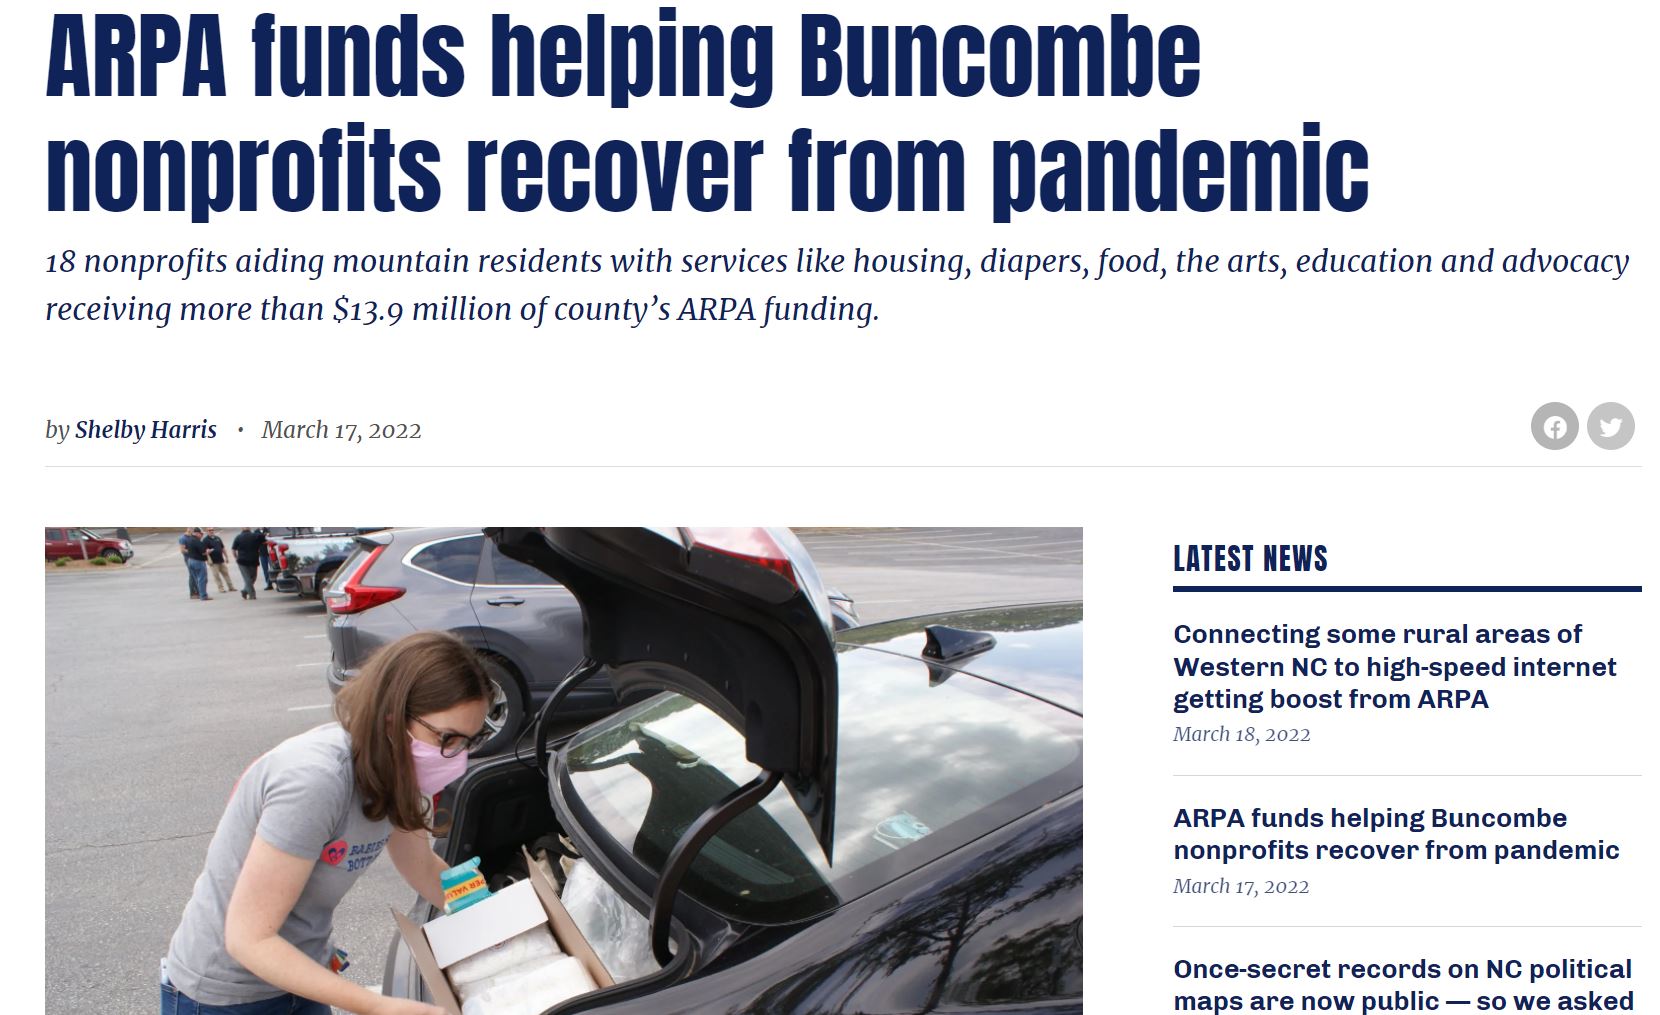 ARPA Funds Helping Buncombe Nonprofits